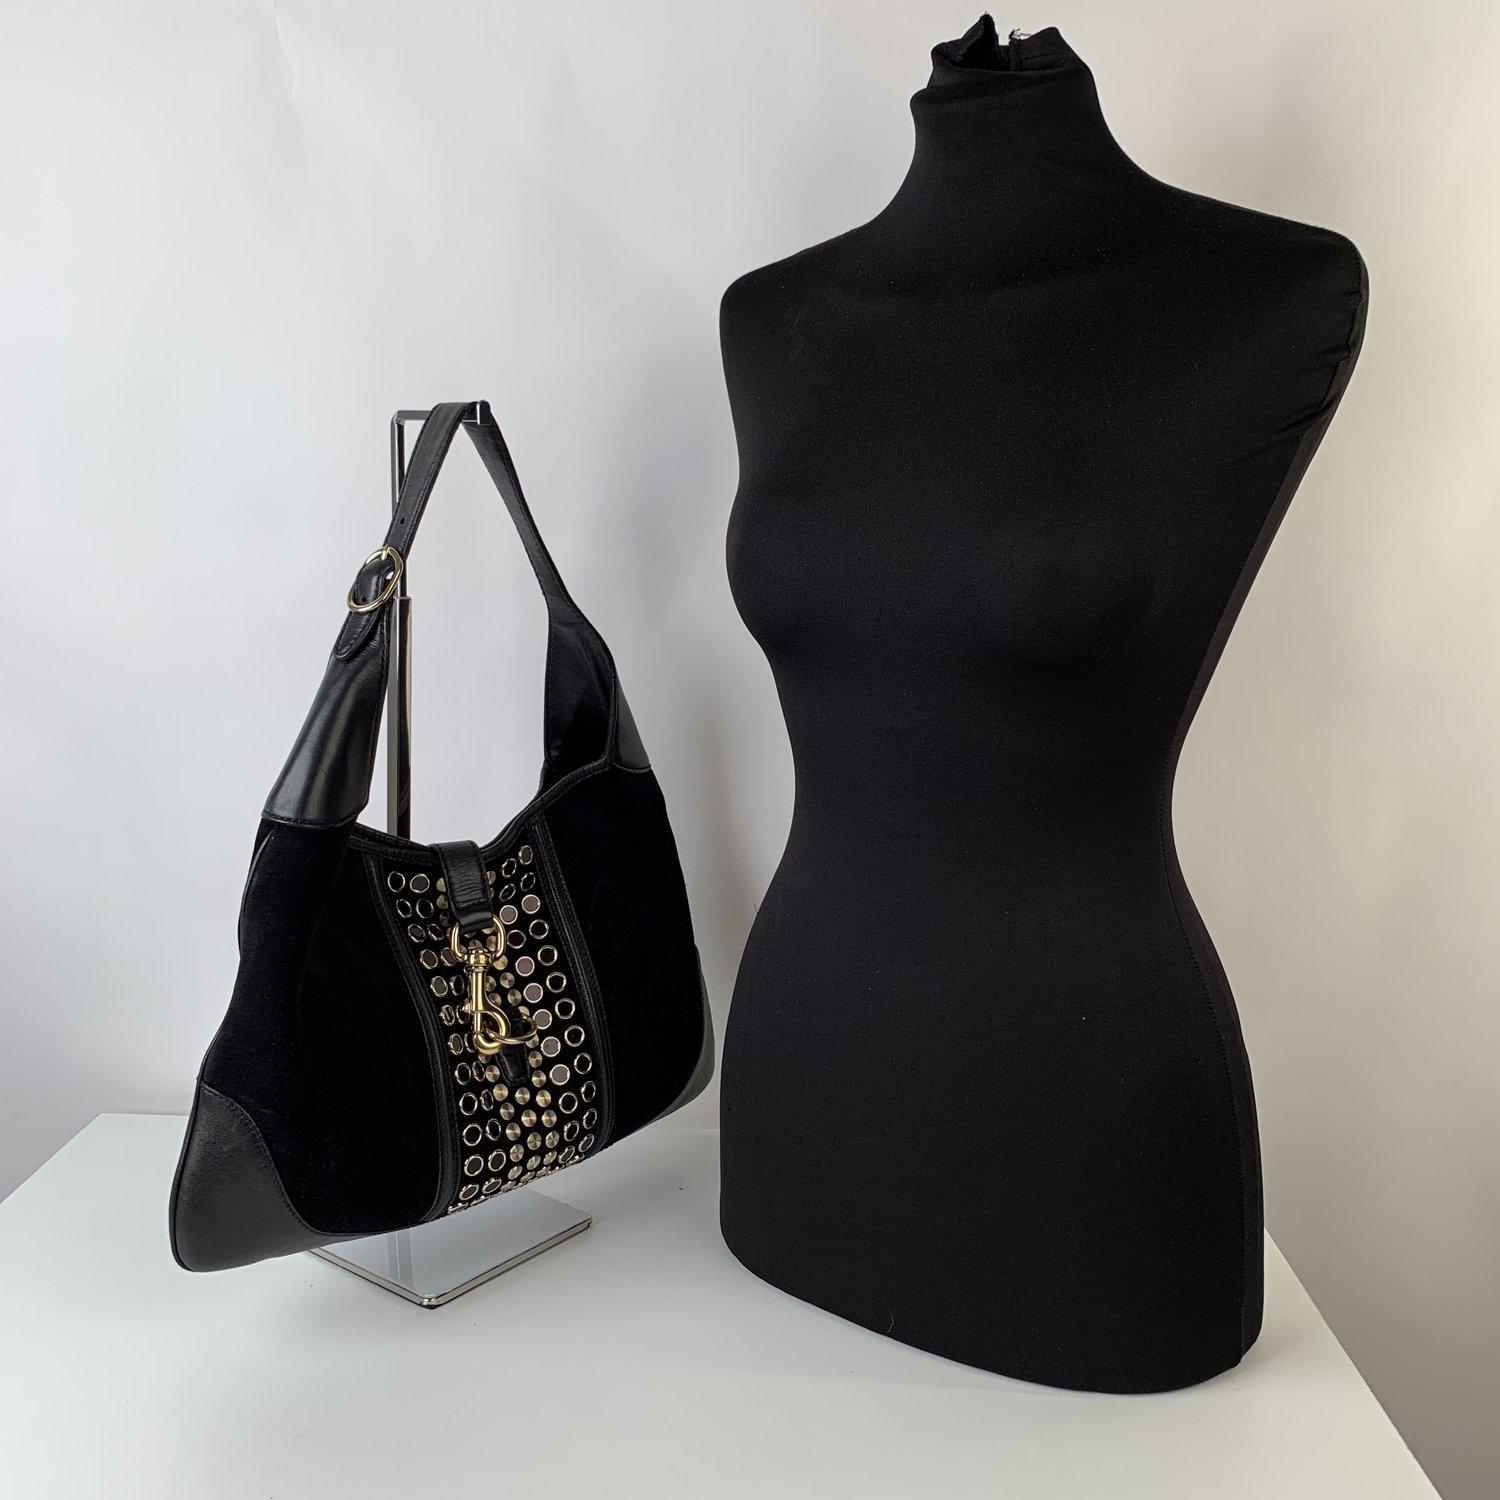 MATERIAL: Leather, Suede COLOR: Black MODEL: Jackie Bouvier Hobo GENDER: Women SIZE: Medium Condition B :GOOD CONDITION - Some light wear of use- Some normal wear of use on suede (slight fading and pressure marks due to normal use). Some wear of use